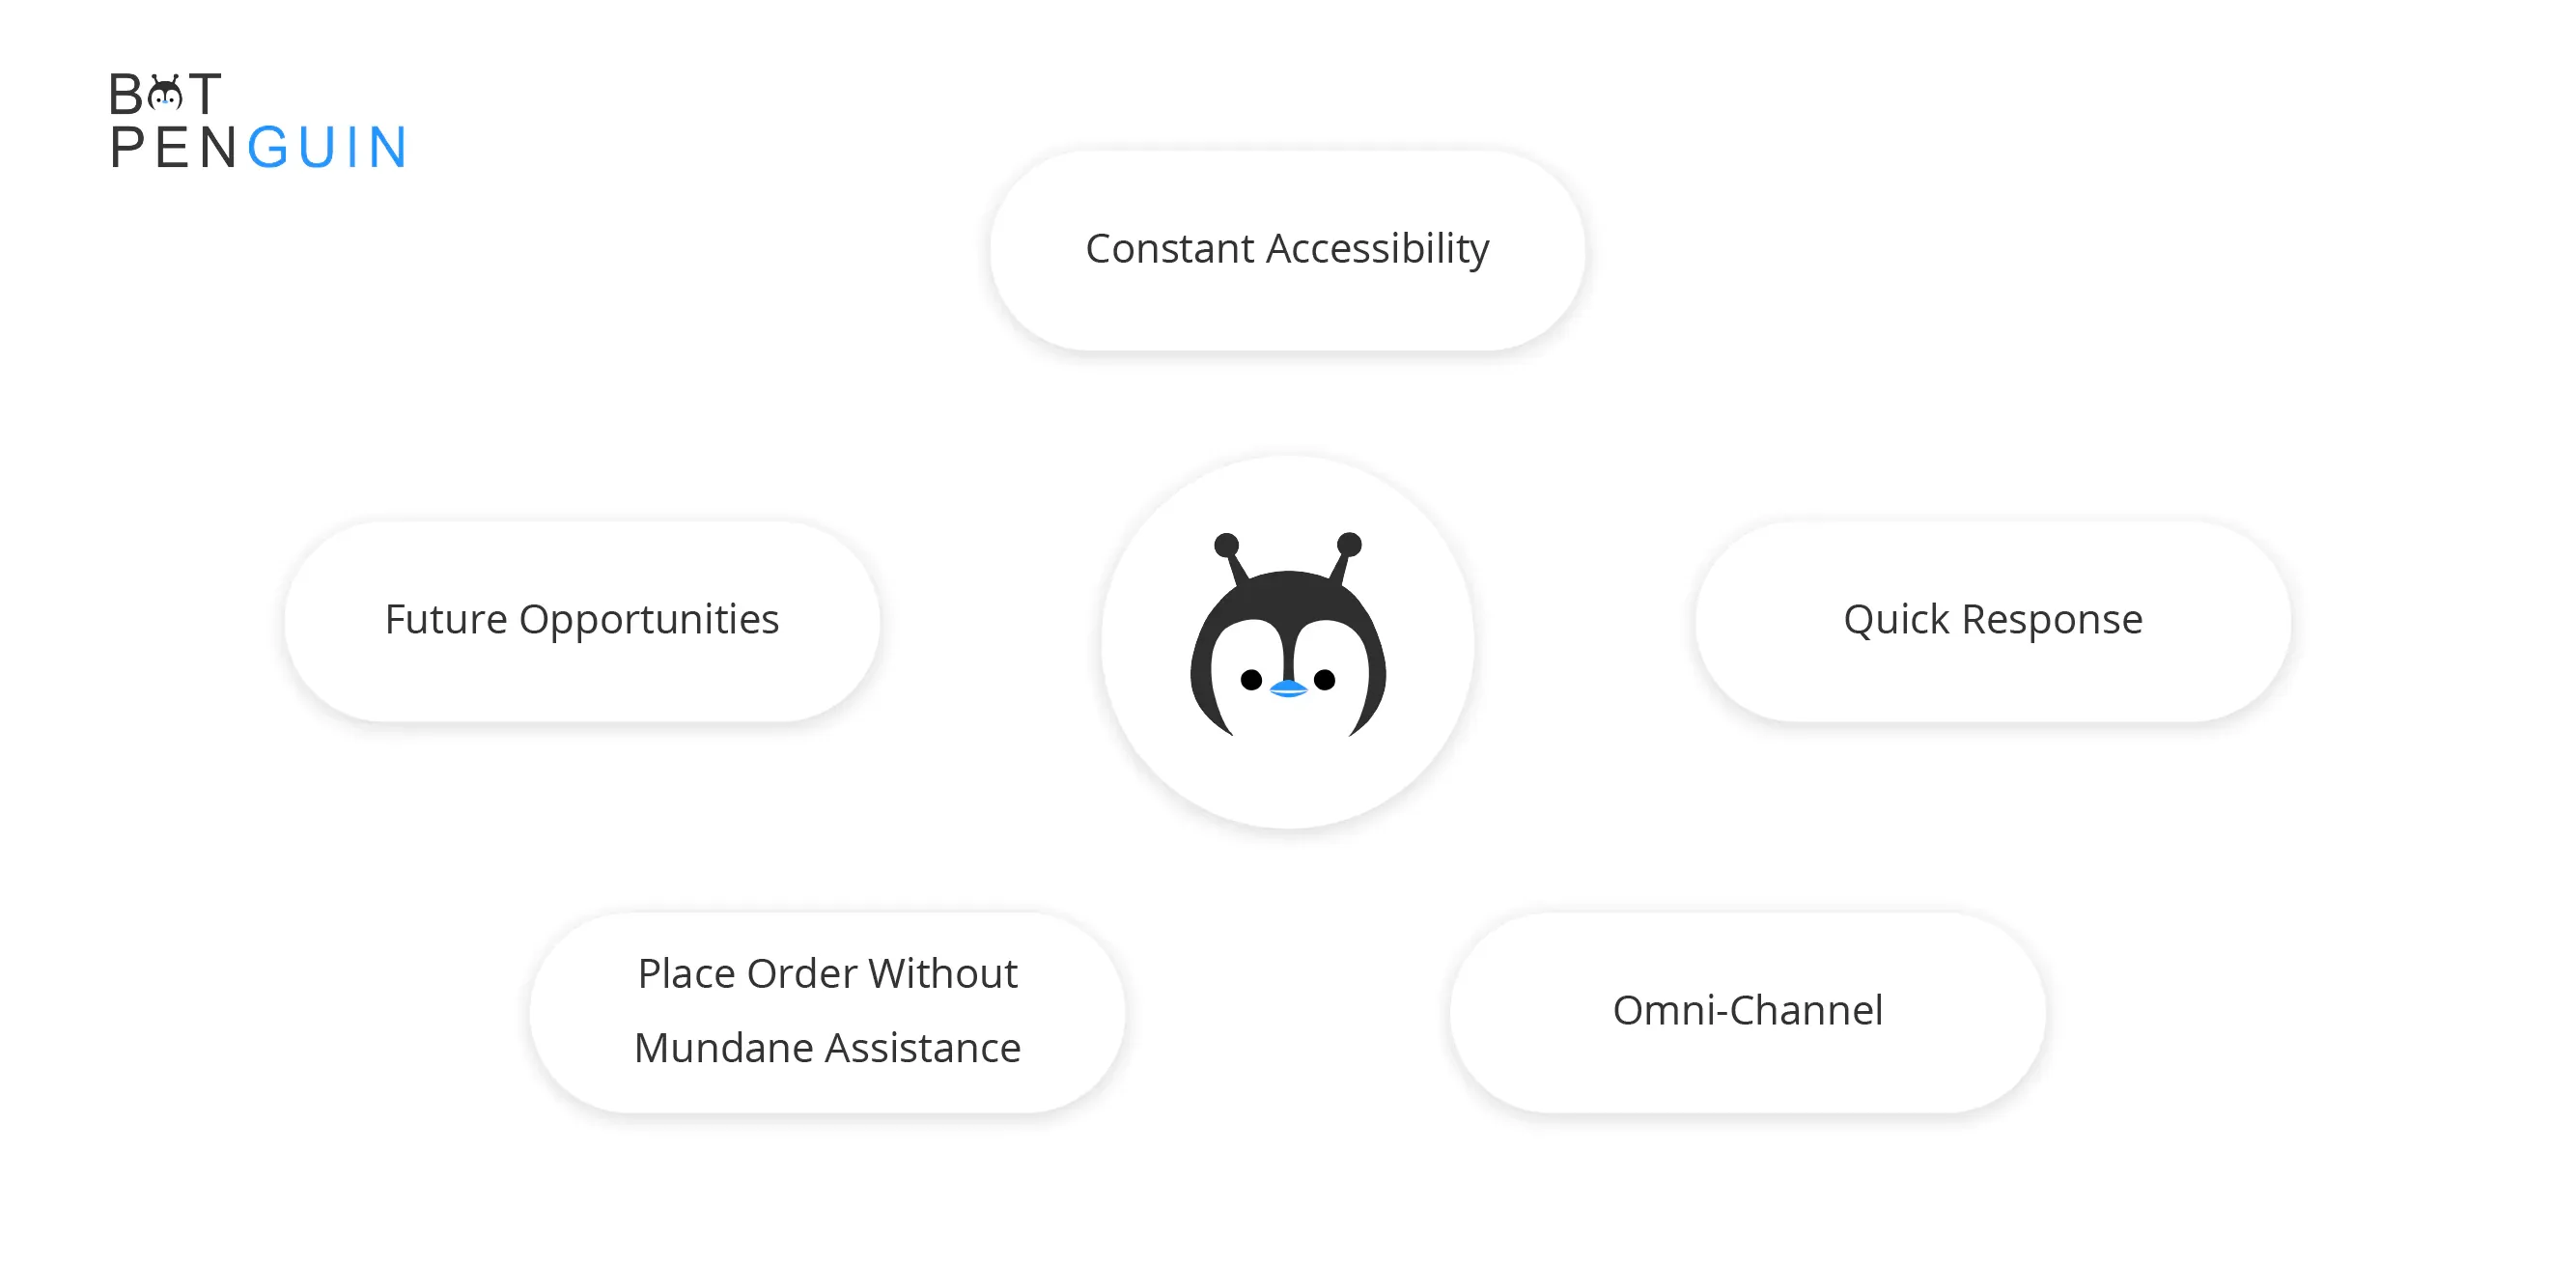 Key Benefits of BotPenguin Chatbots in the Real Estate Industry